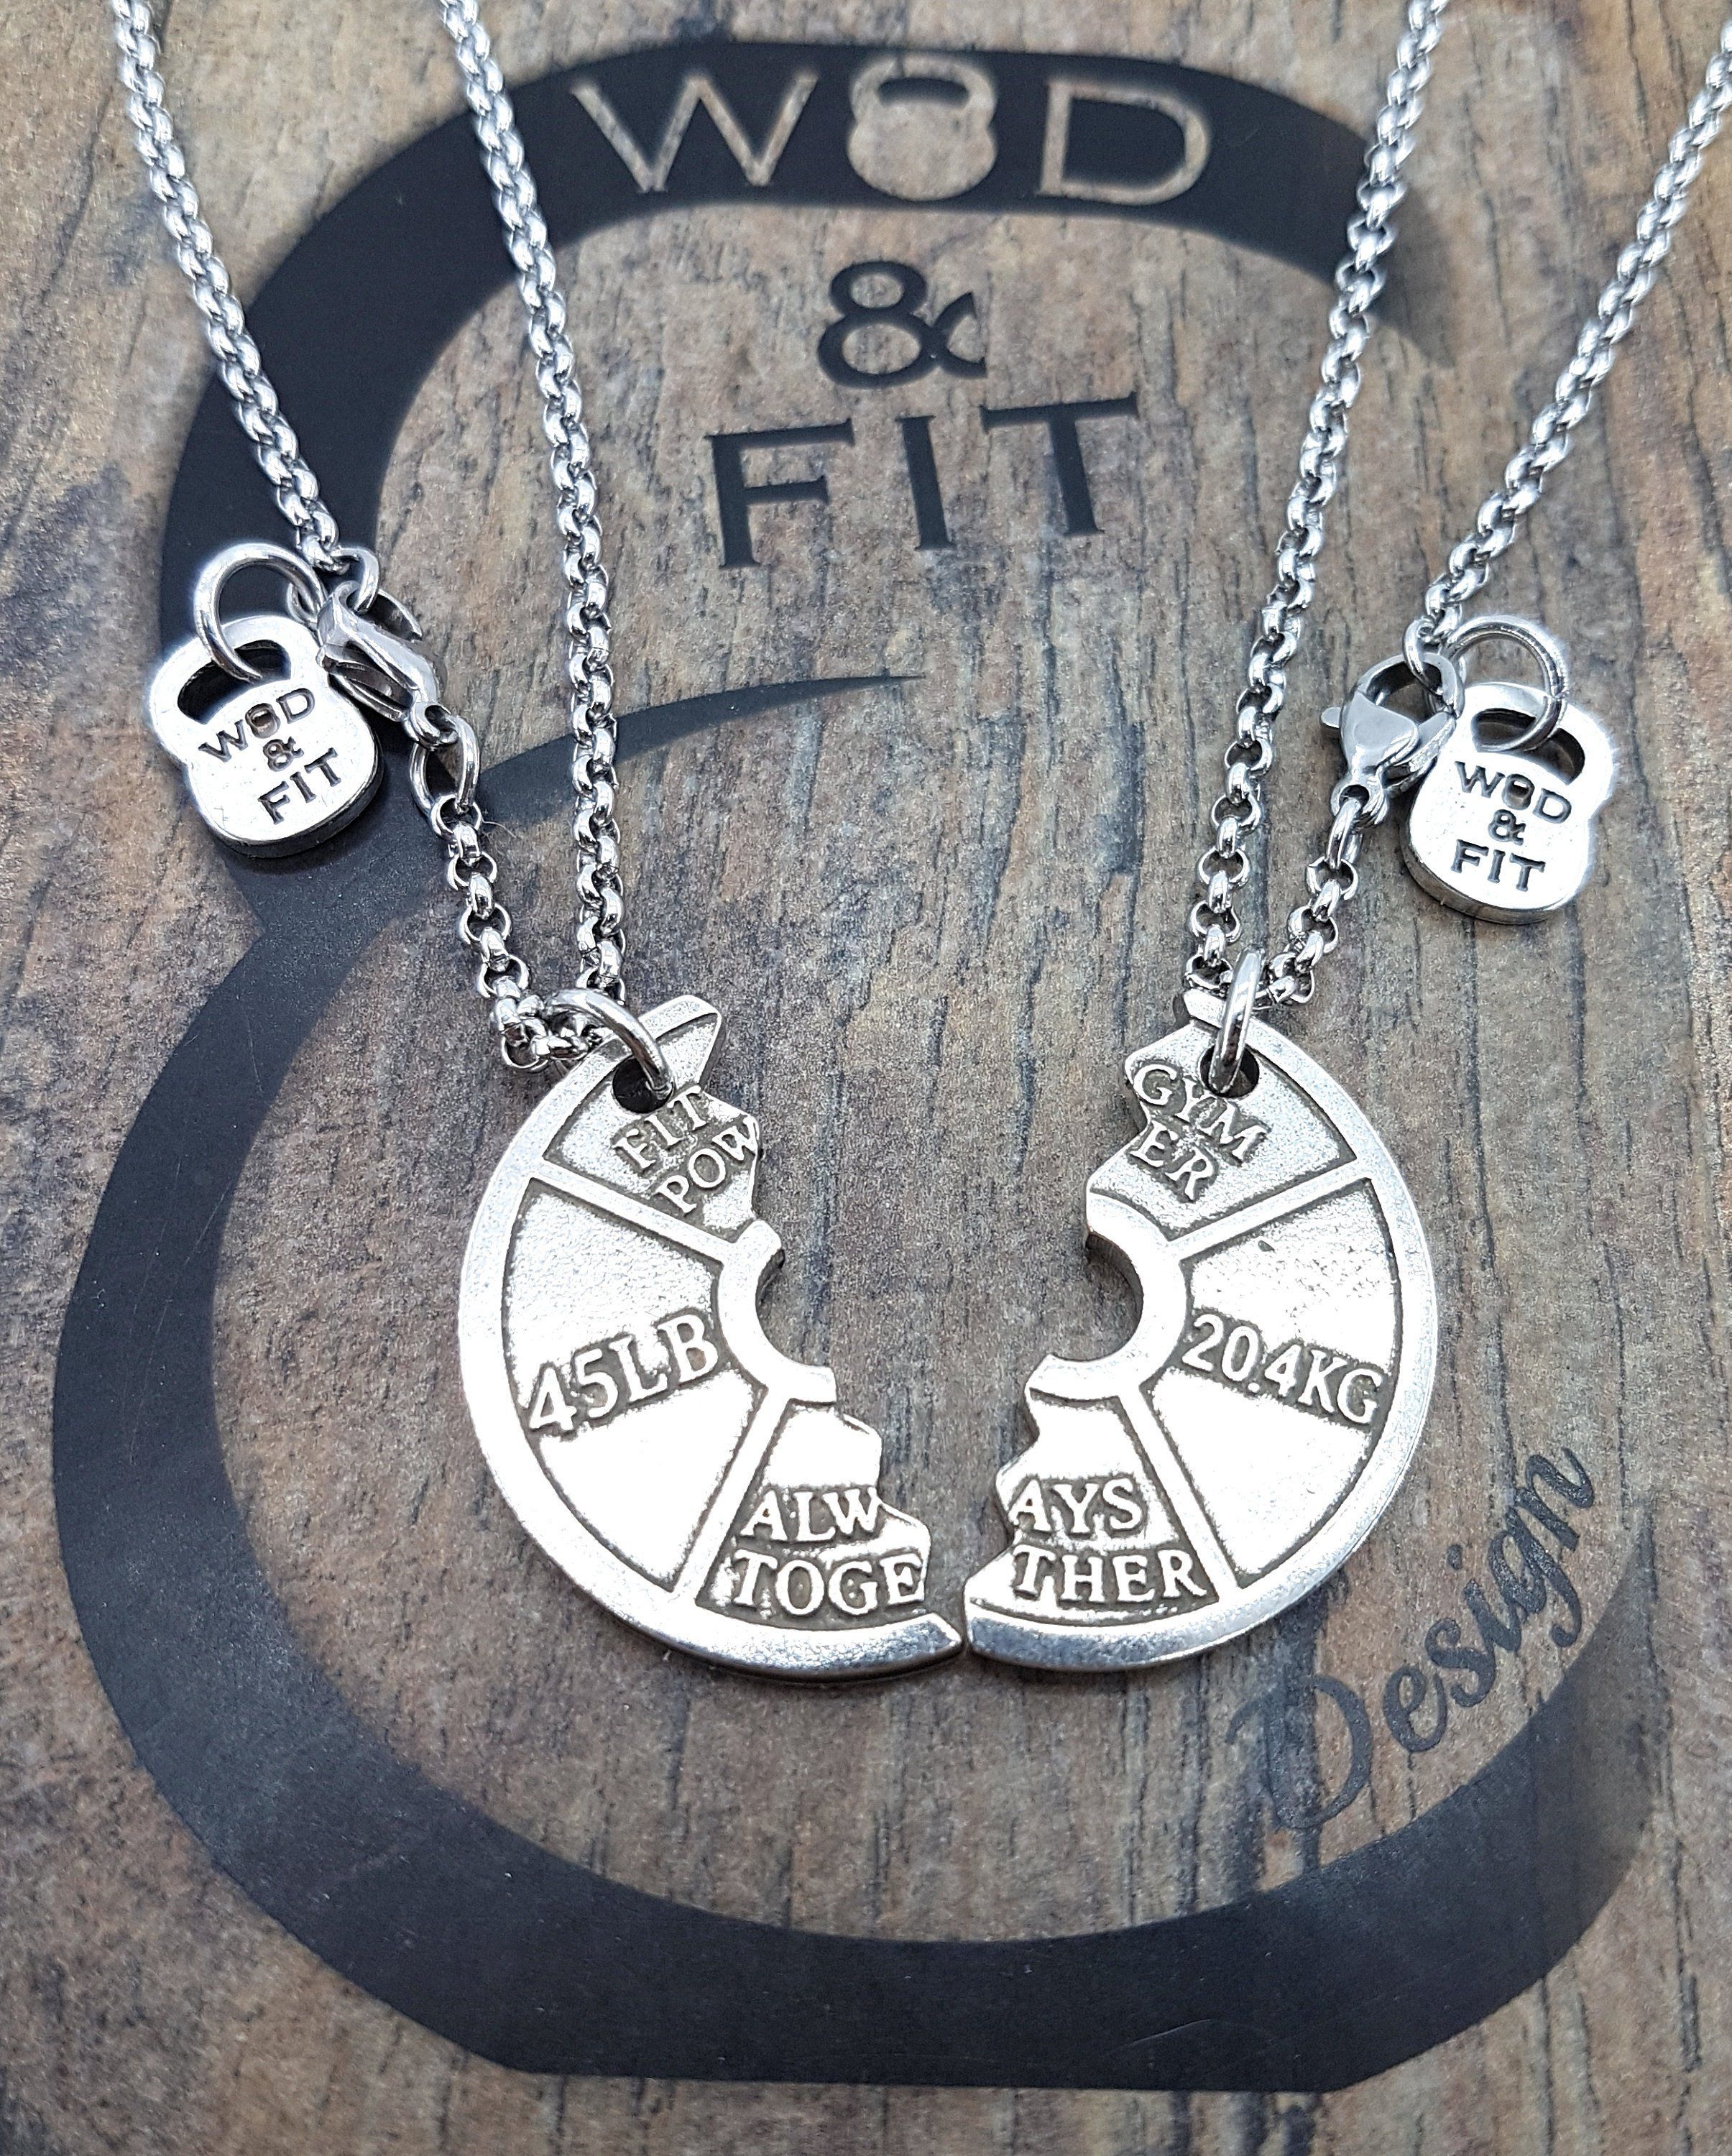 Couple Necklaces Weight Plate 45lbs Always Together.Train Together/Stay Together.Weightlifter,Fitness Girl,Fitmom Bodybuilding,Couples Gift -   18 parejas fitness gym
 ideas